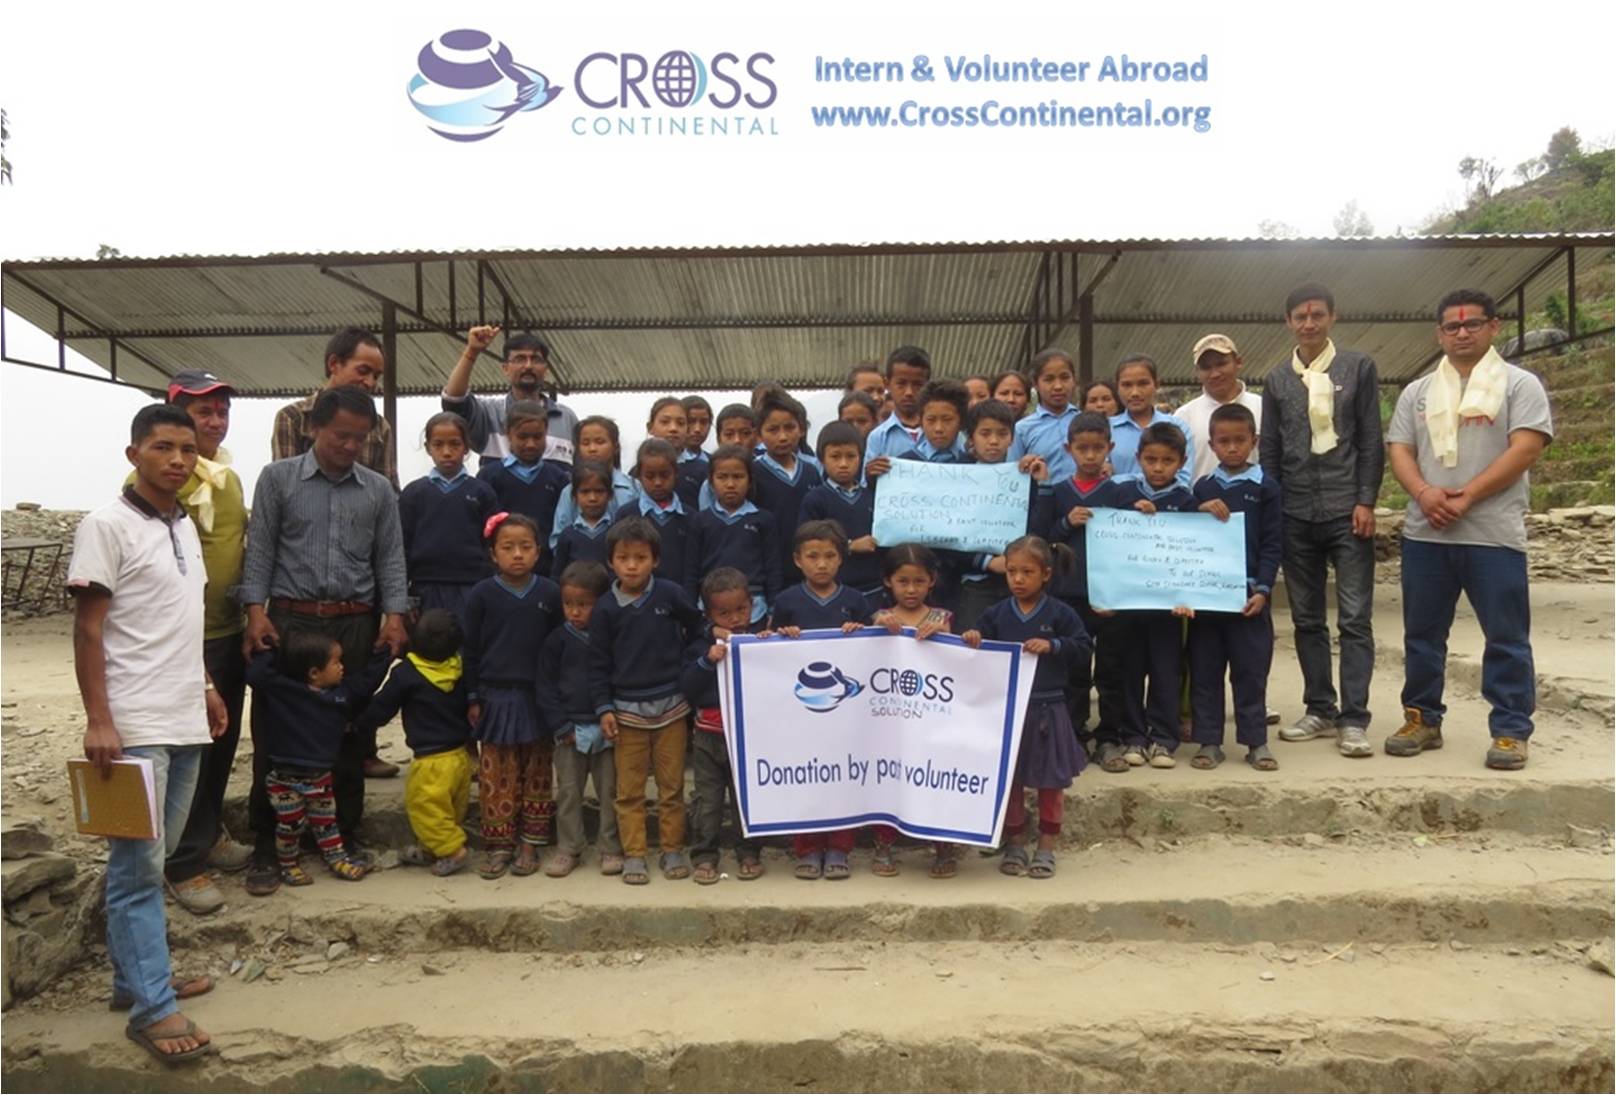 CrossContinental Relief Fund for Earthquake Victims in Nepal